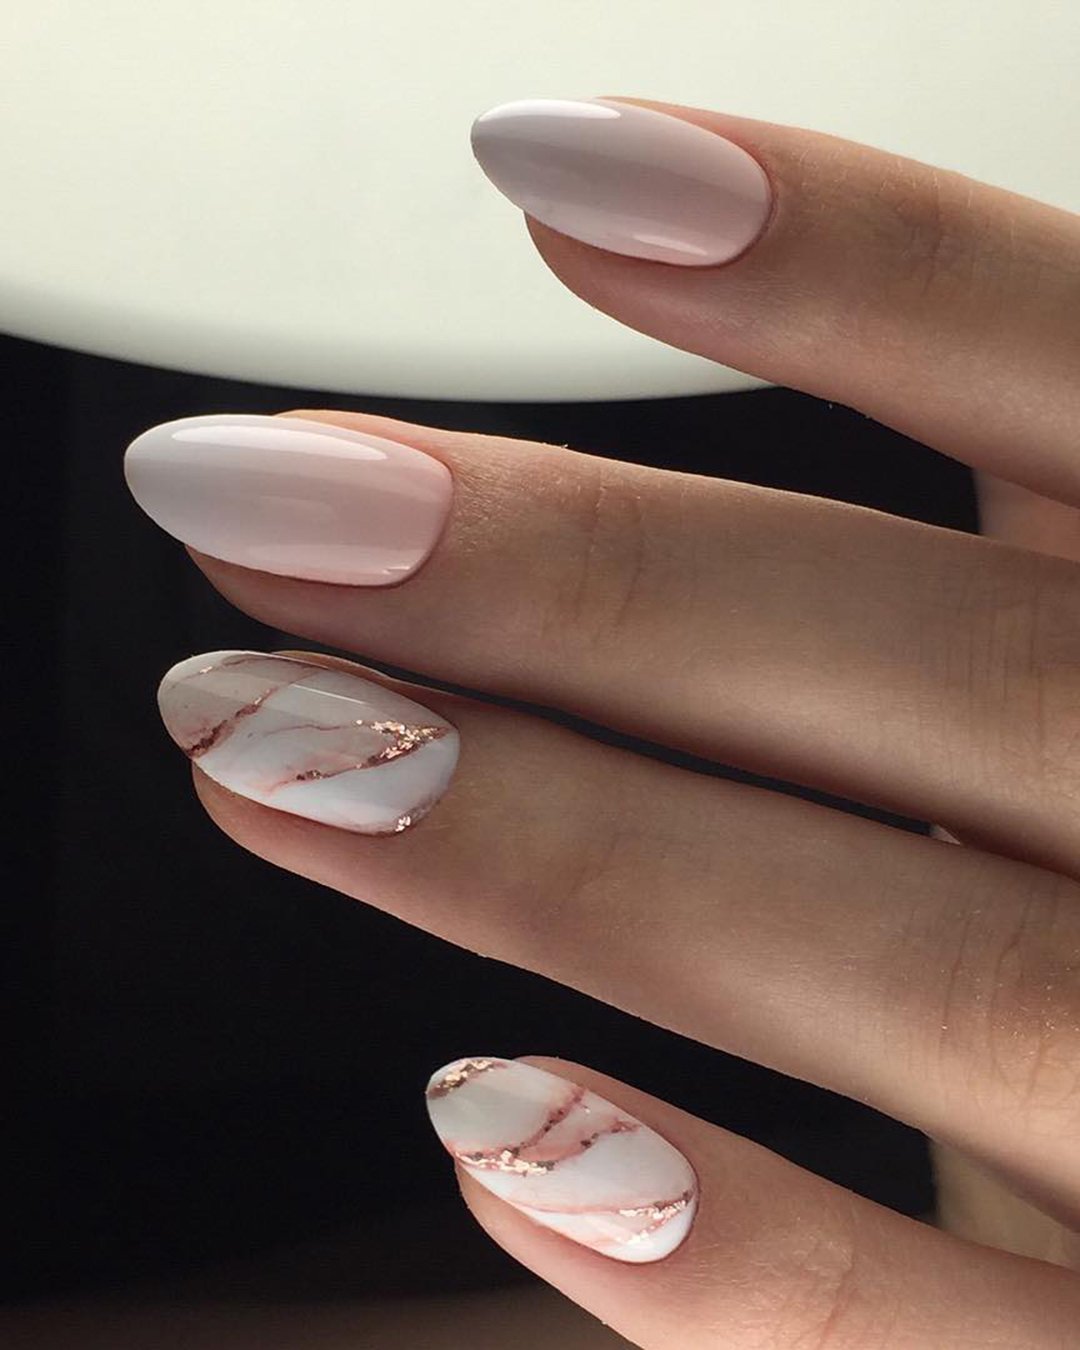 pink and white nails gentle marble effect mariapro.nails